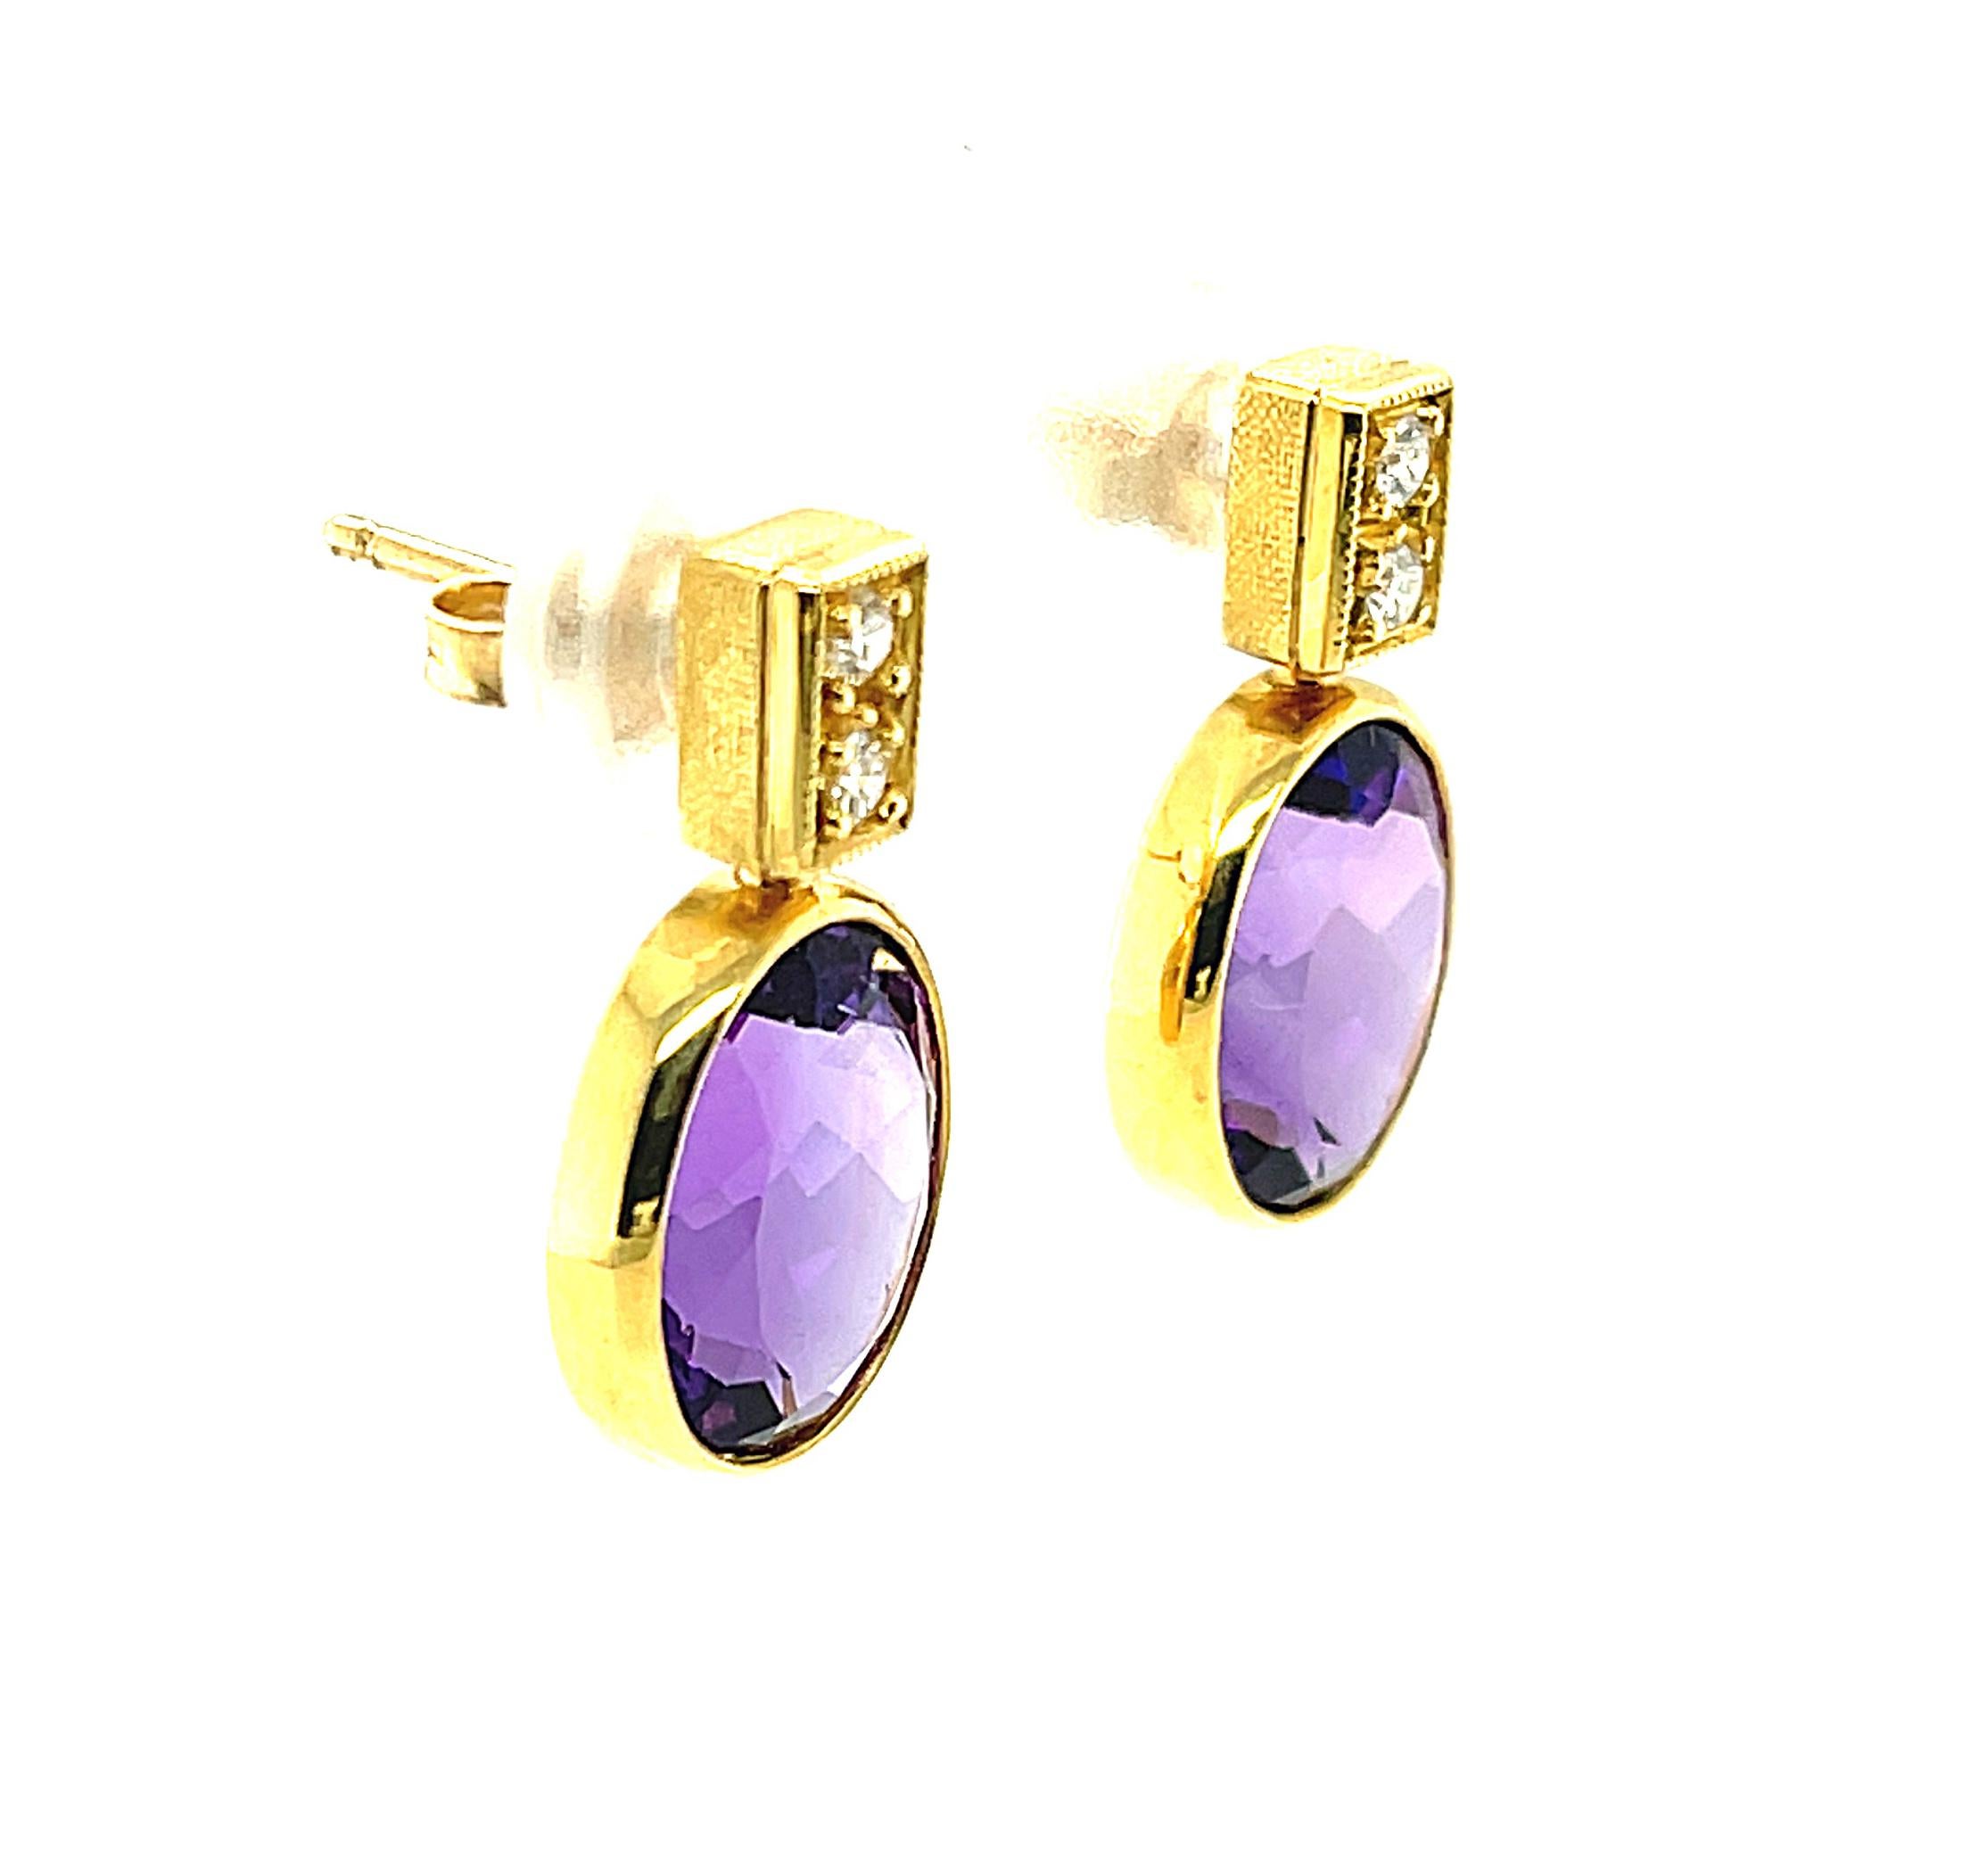 Artisan Amethyst and Diamond Drop Earrings in 18k Yellow Gold, 6.72 Carats Total For Sale